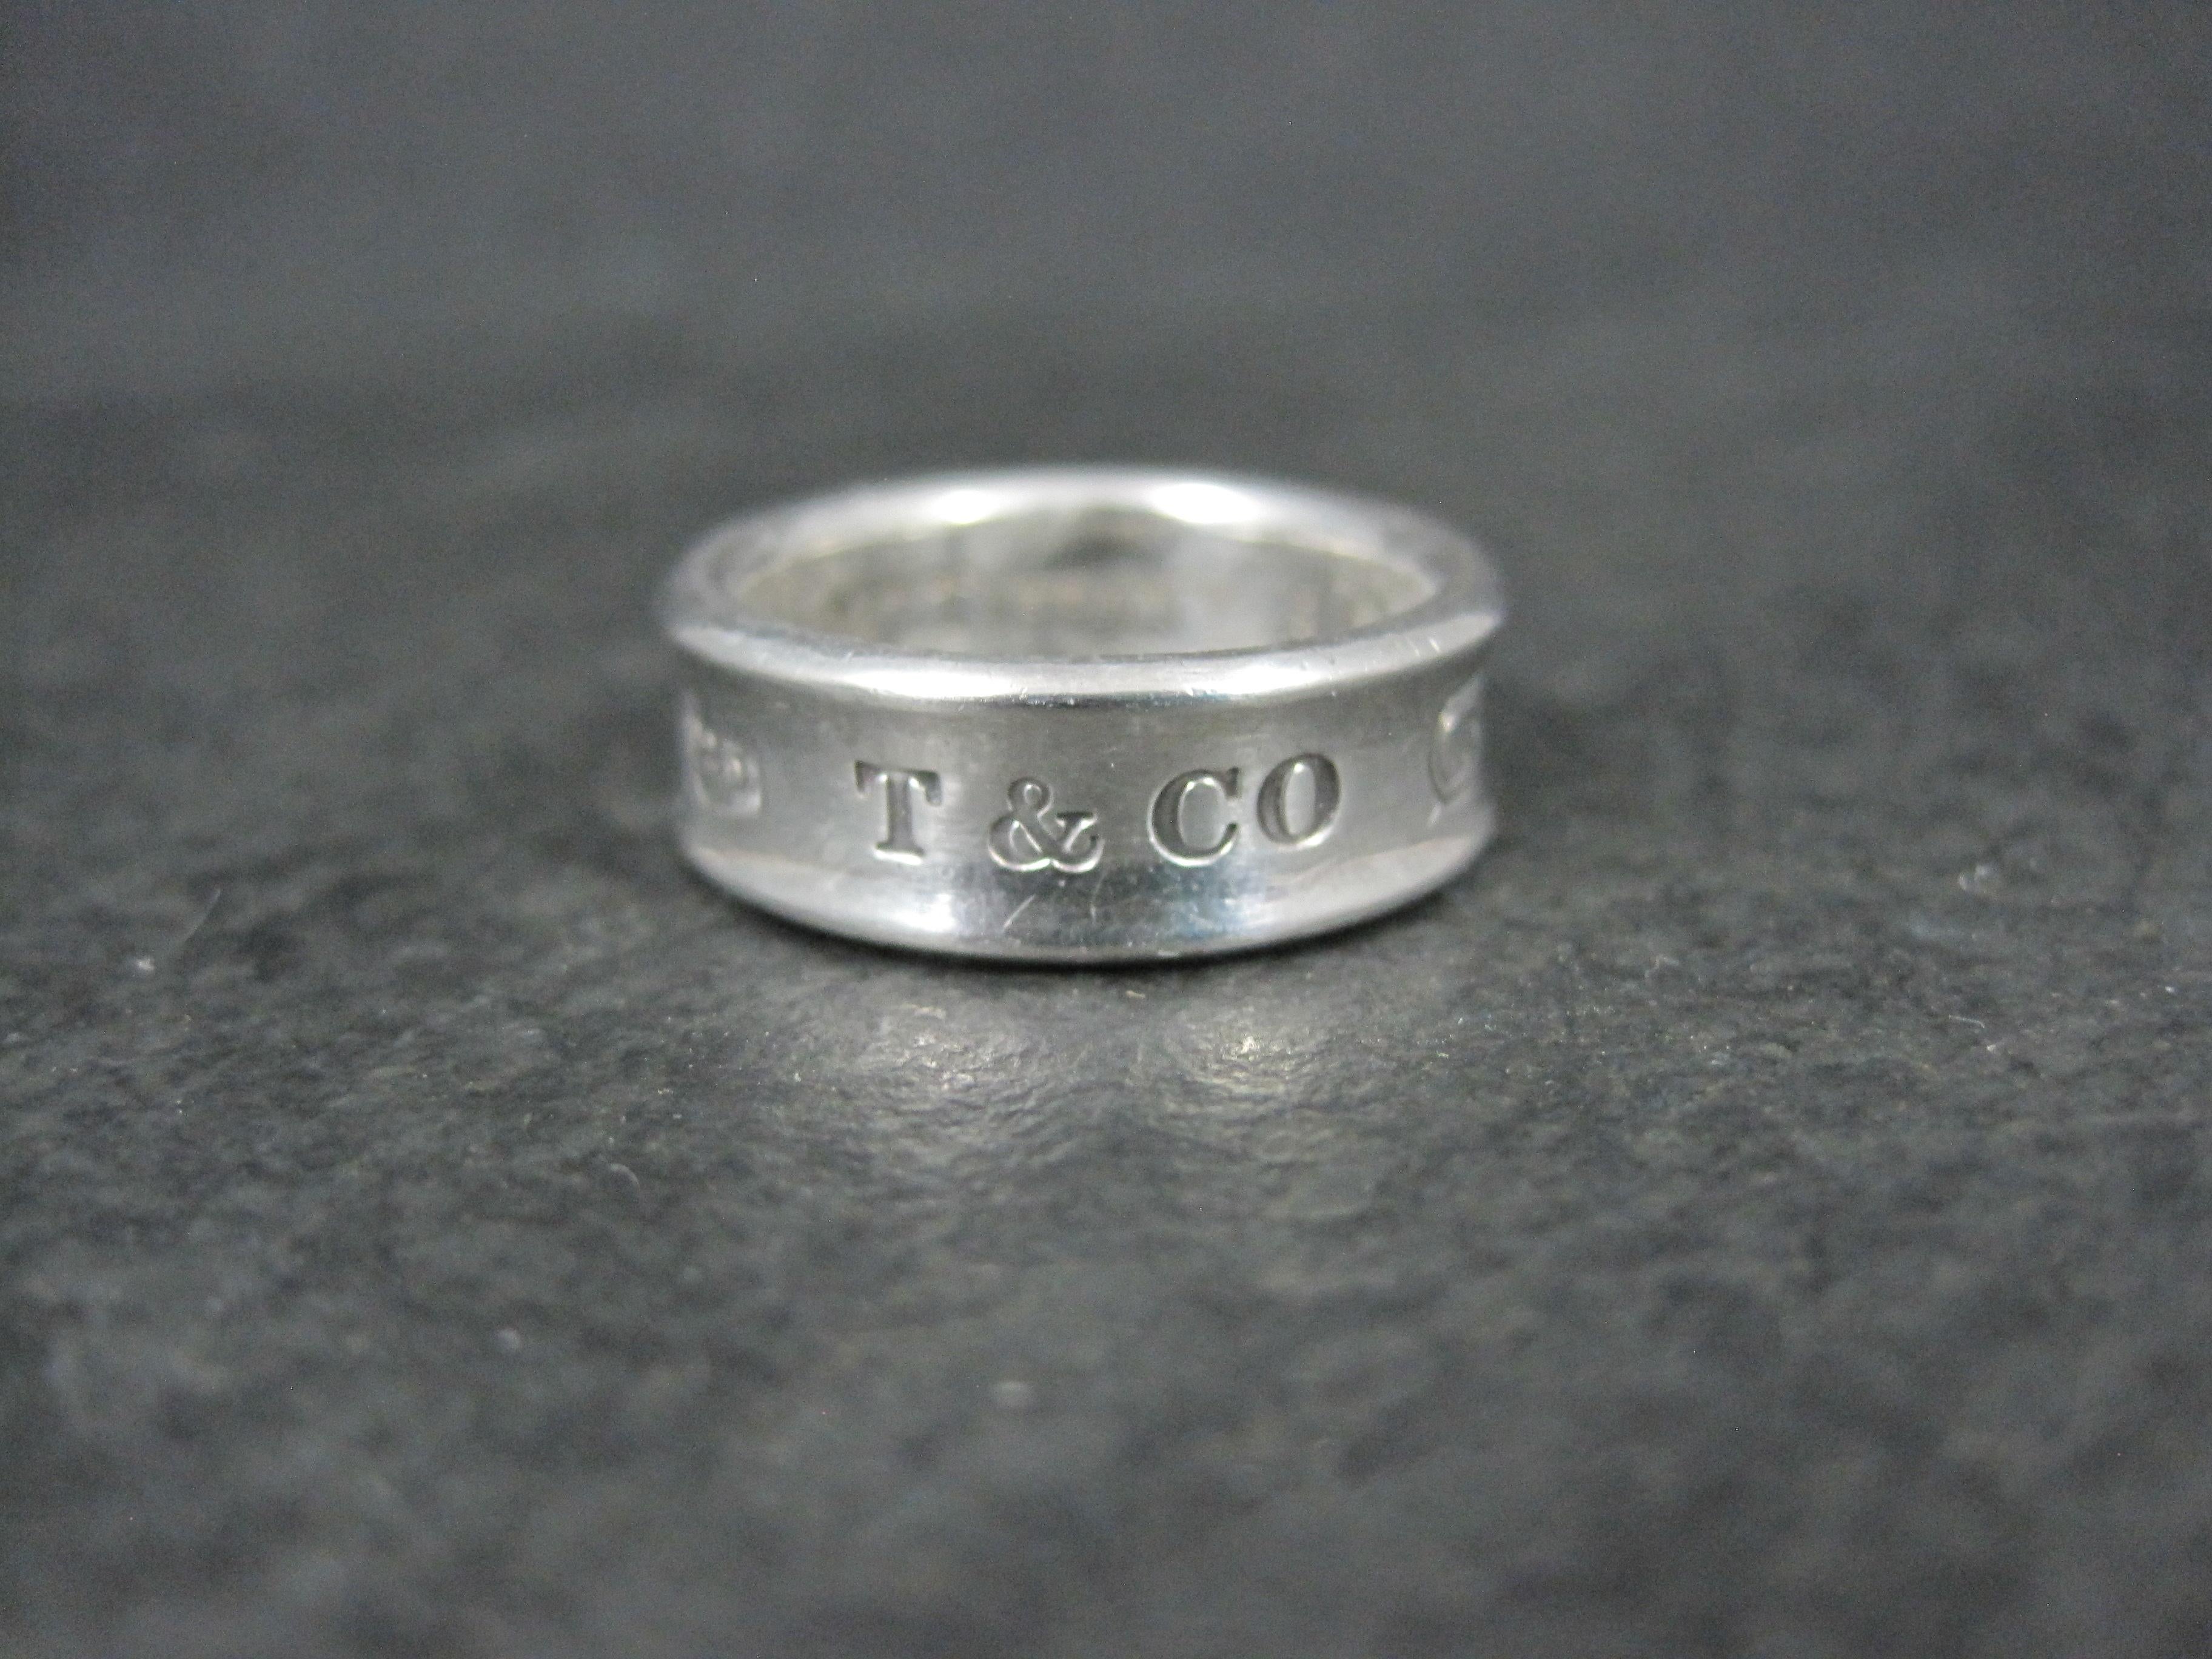 This gorgeous, authentic 1997 Tiffany & Co, 1837 concave band ring is sterling silver.

Measurements: 7mm wide (considered medium)
Size: 6 1/2

Condition: Excellent with original Tiffany & Co snap pouch

